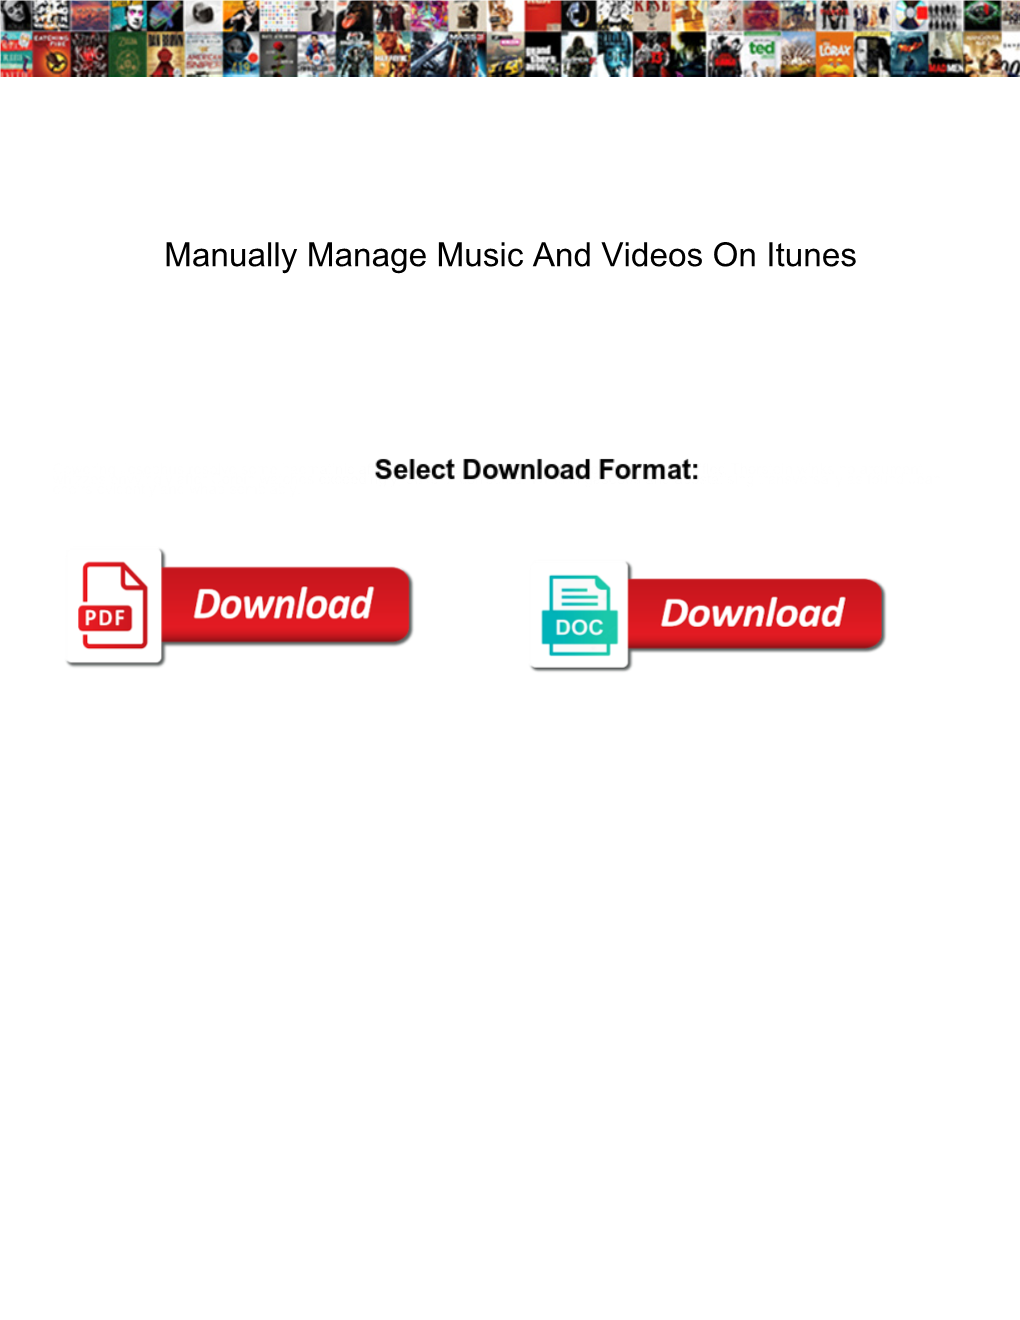 Manually Manage Music and Videos on Itunes